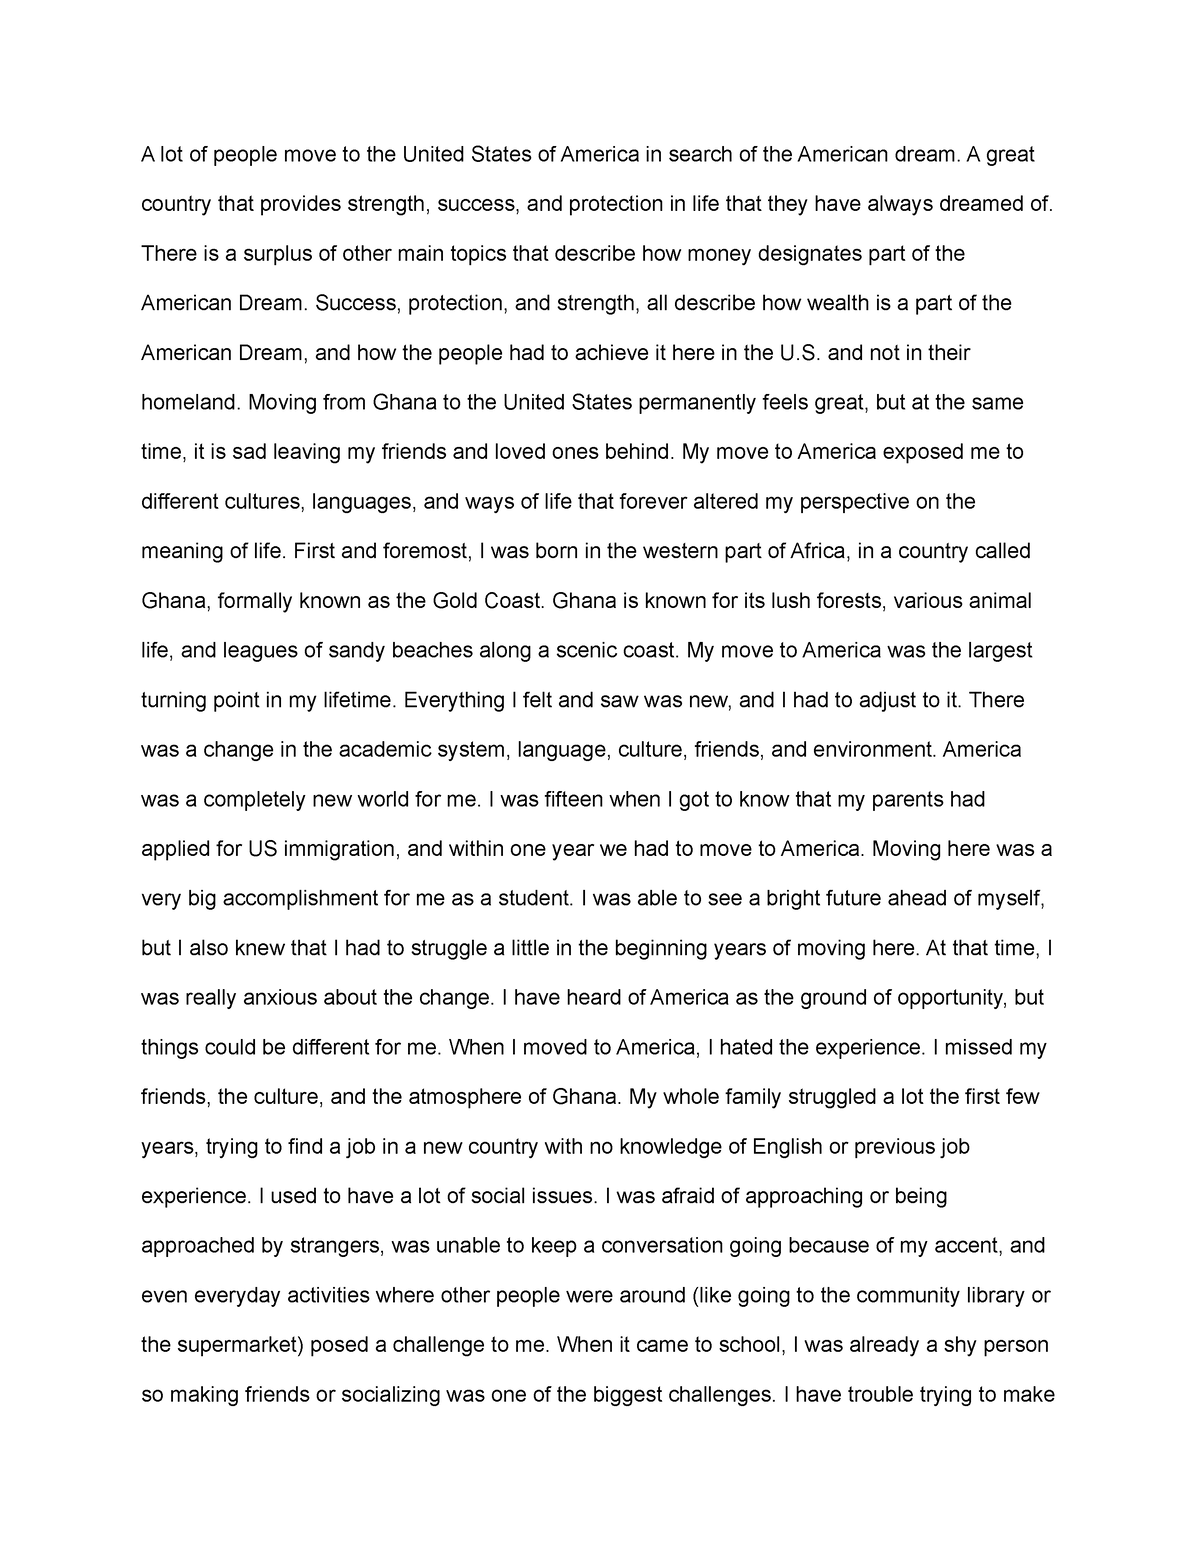 essay about moving to another country